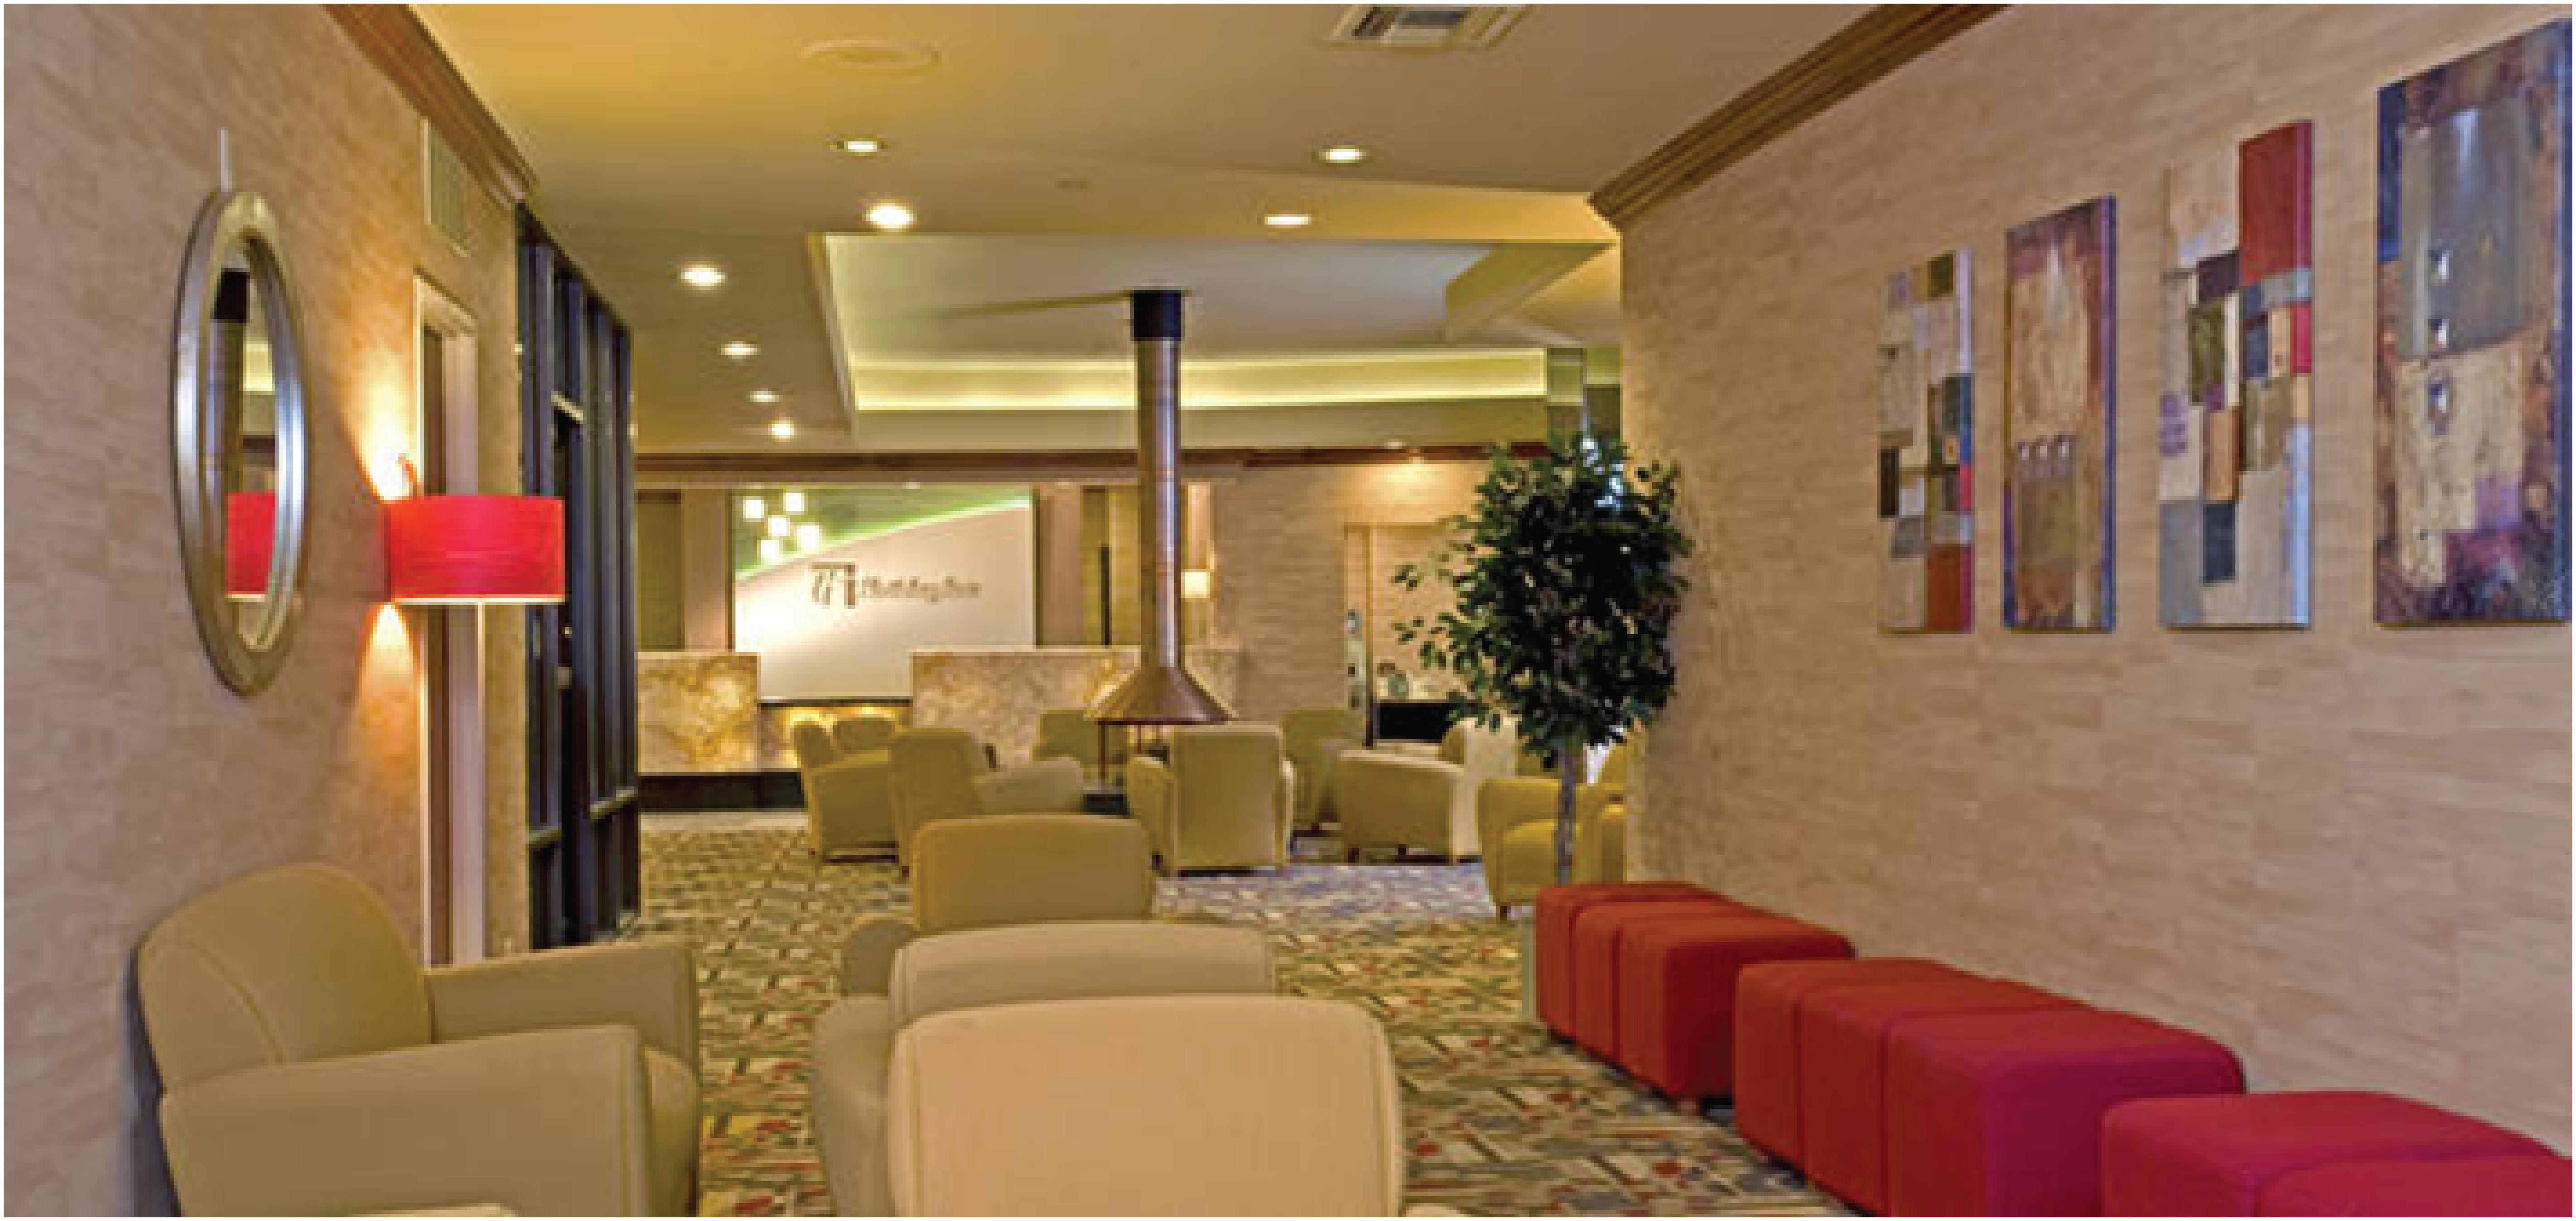 Just ten minutes from downtown , the Holiday Inn Lakewood is an ideal Lakew...